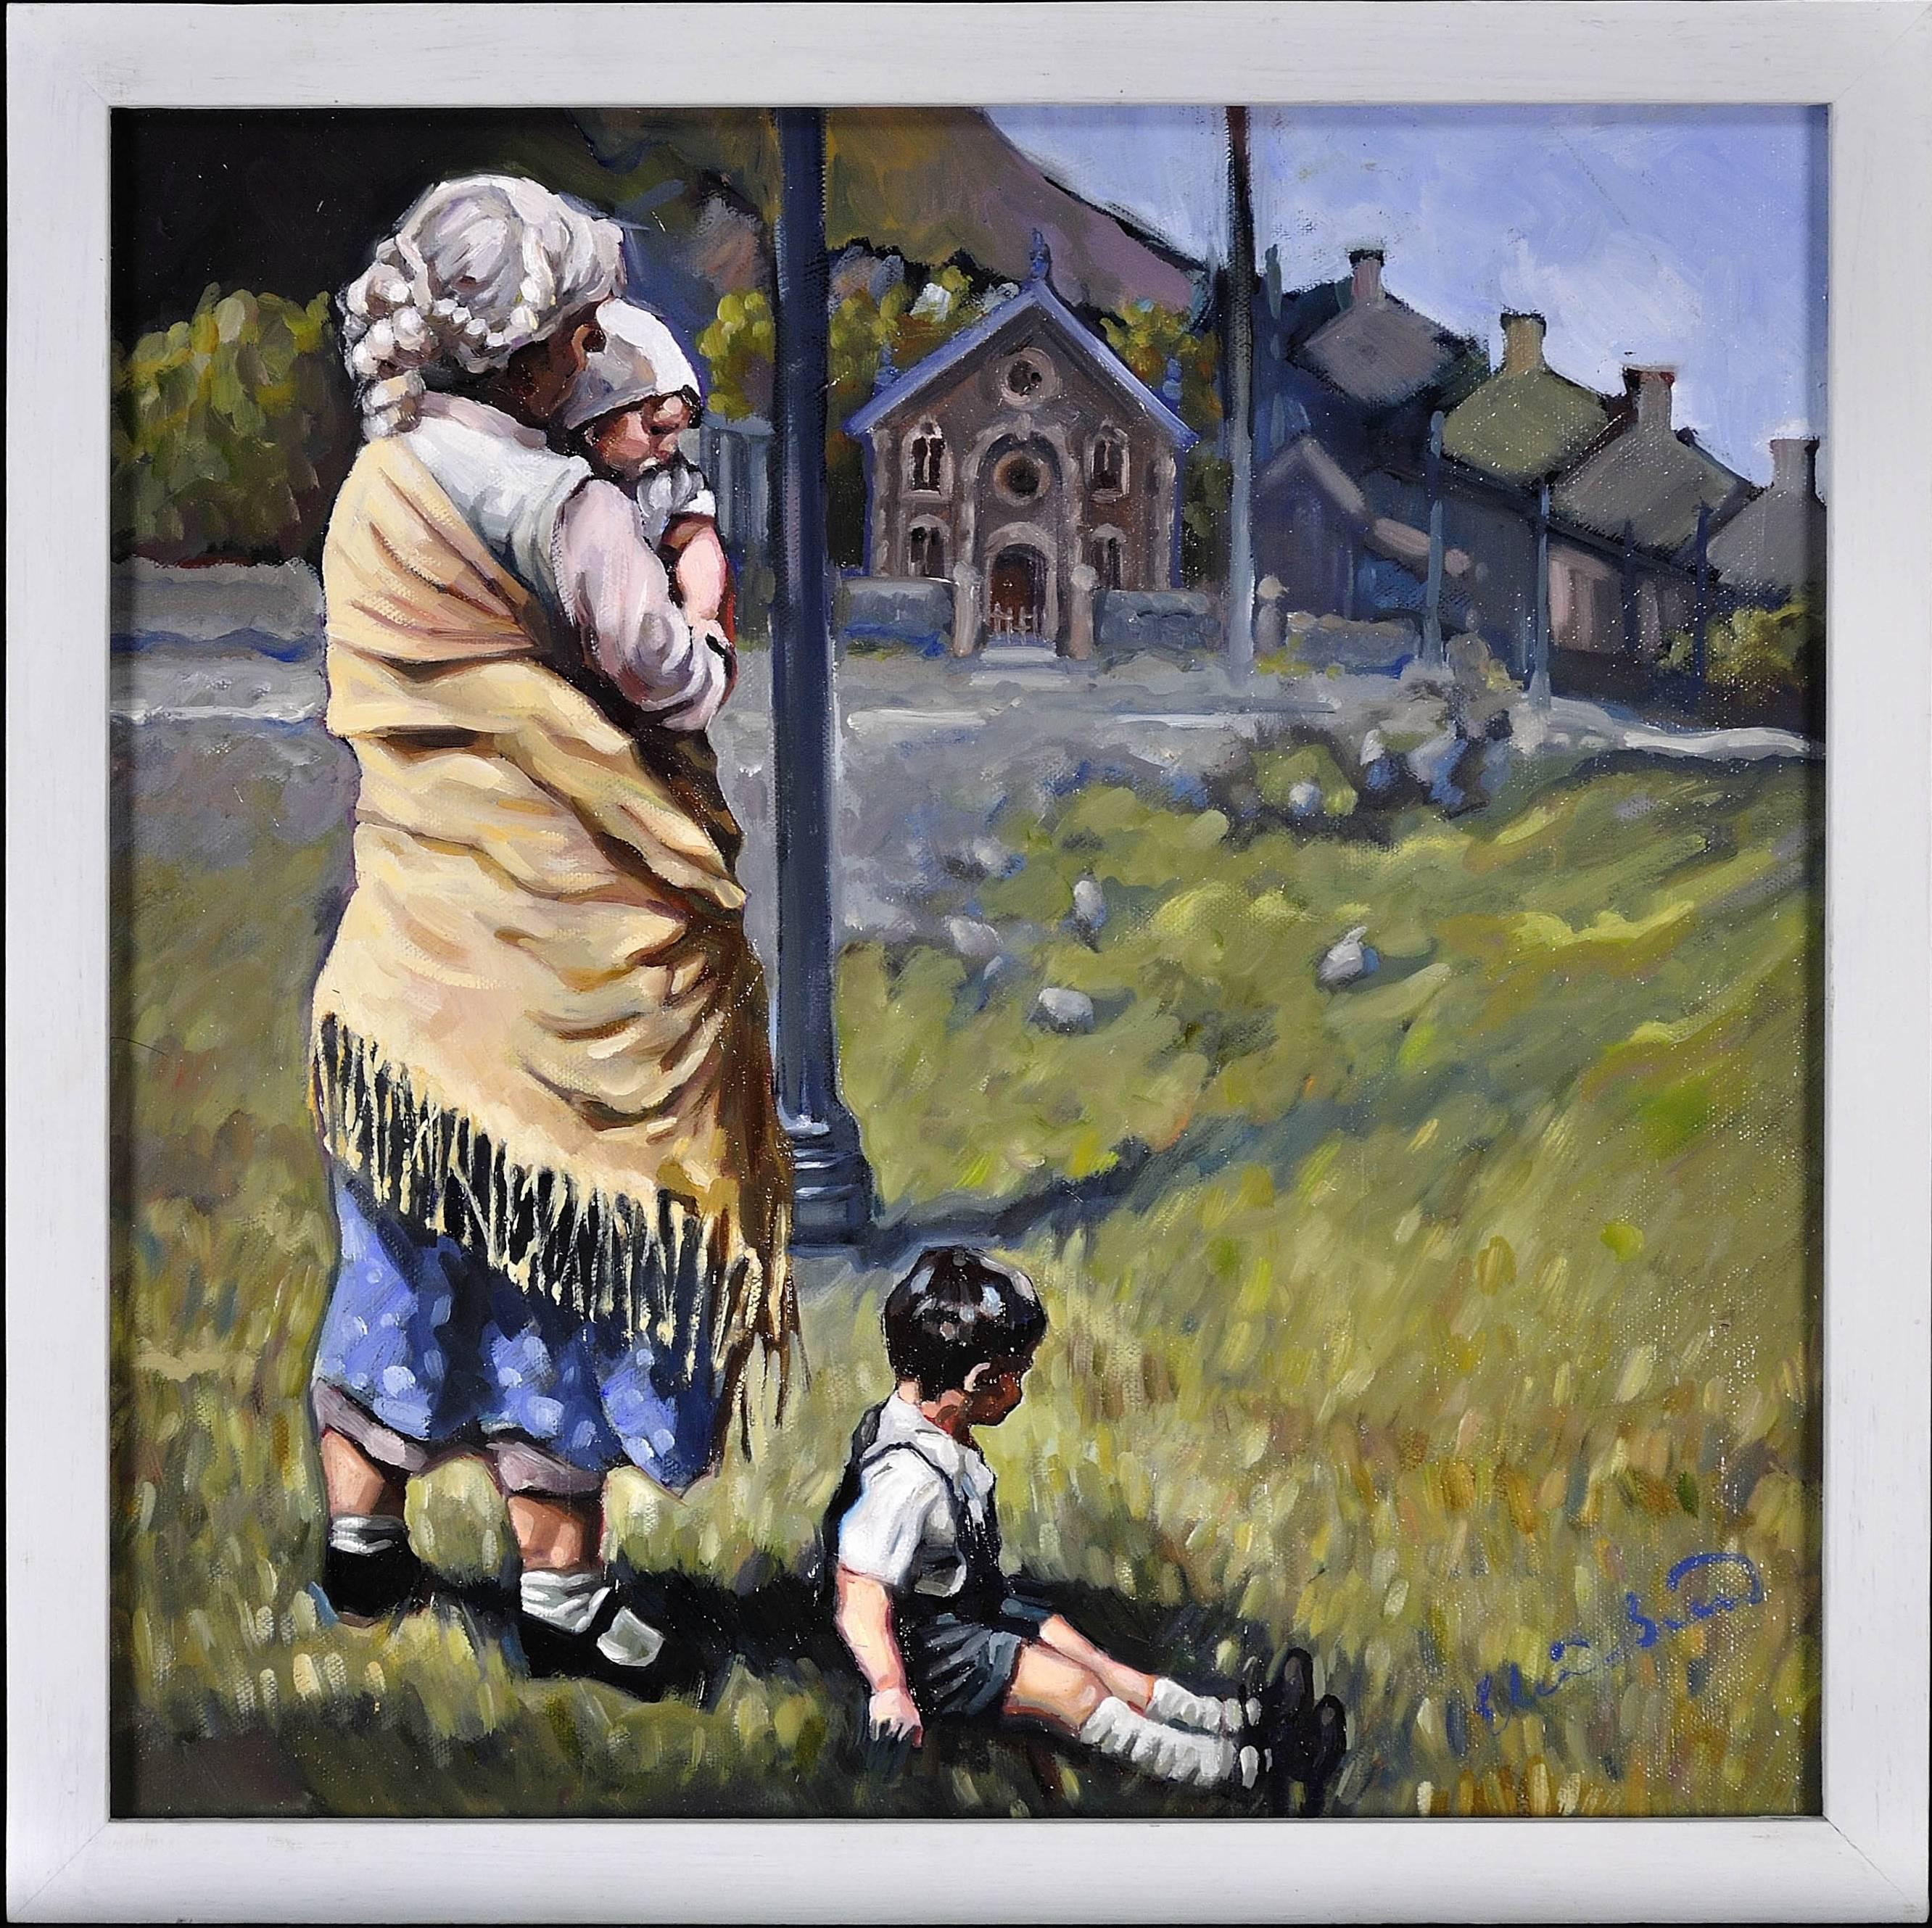 Waiting for dad (Disgwyl dad). Welsh working life, the everyday life. - Painting by Elin Sian Blake